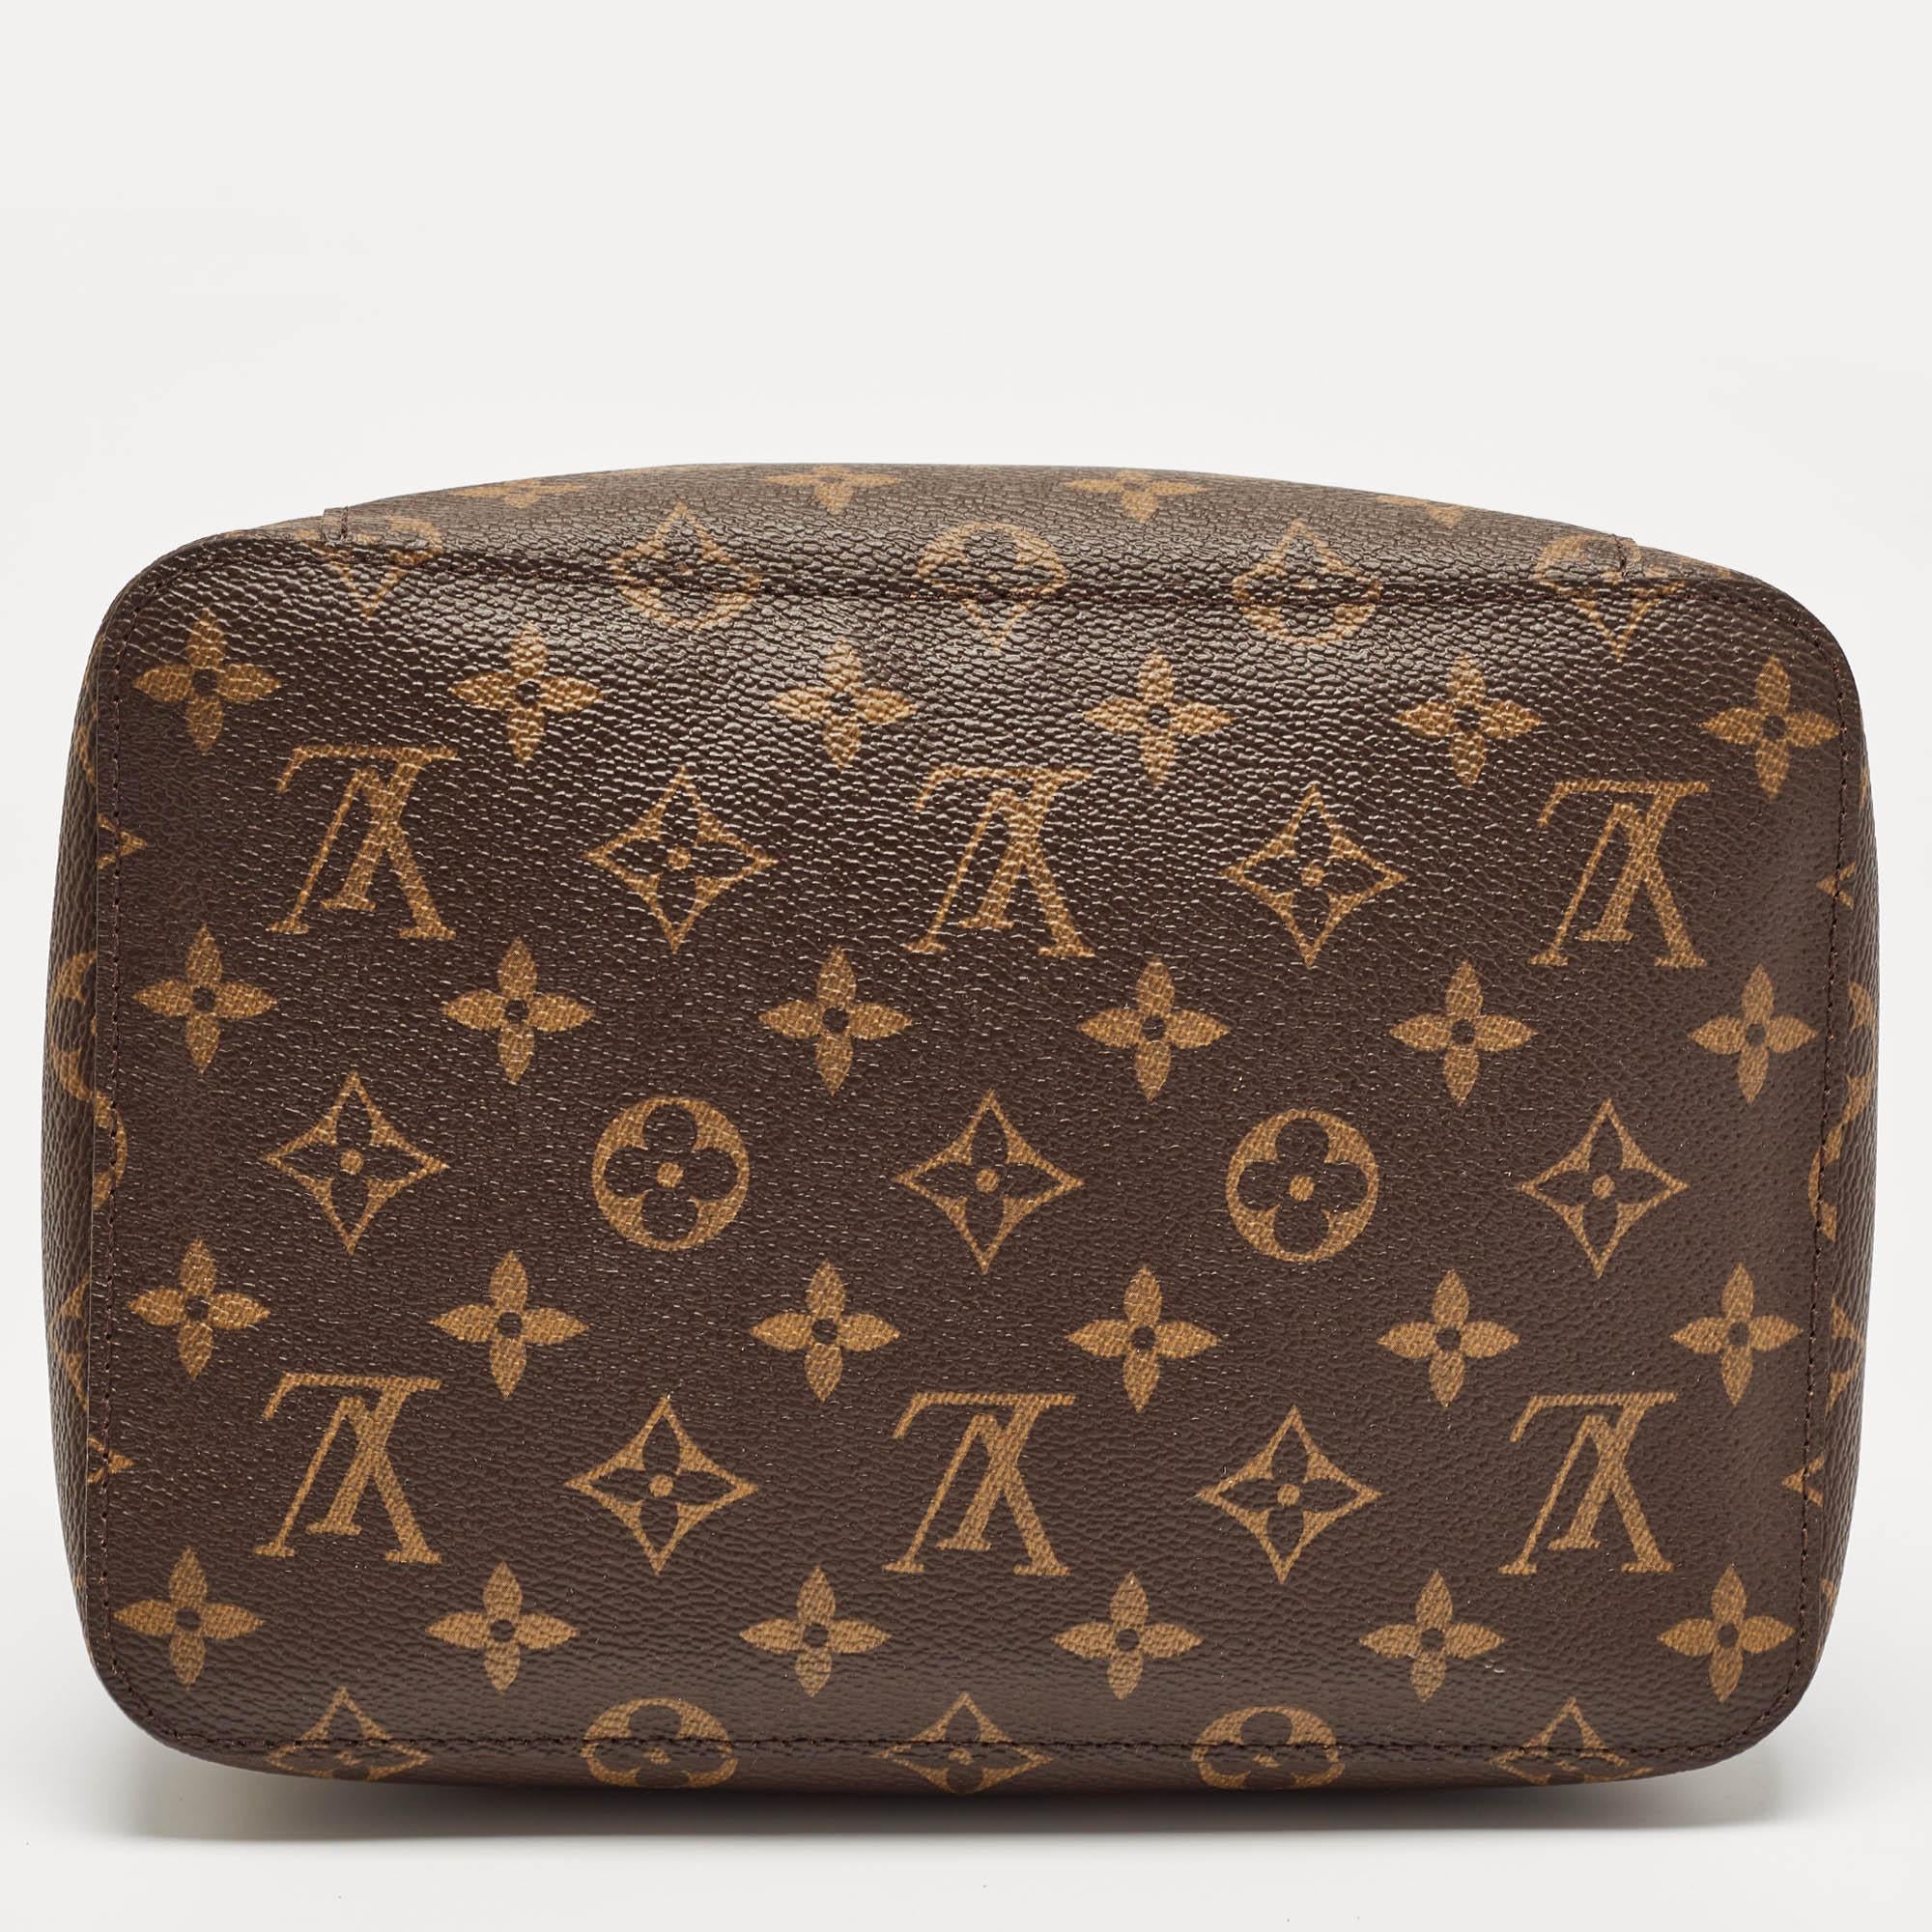 Louis Vuitton's creations are popular owing to their high style and functionality. This case, like all the other handbags, is durable and stylish. Exuding a fine finish, the bag is designed to give a luxurious experience. The interior has enough